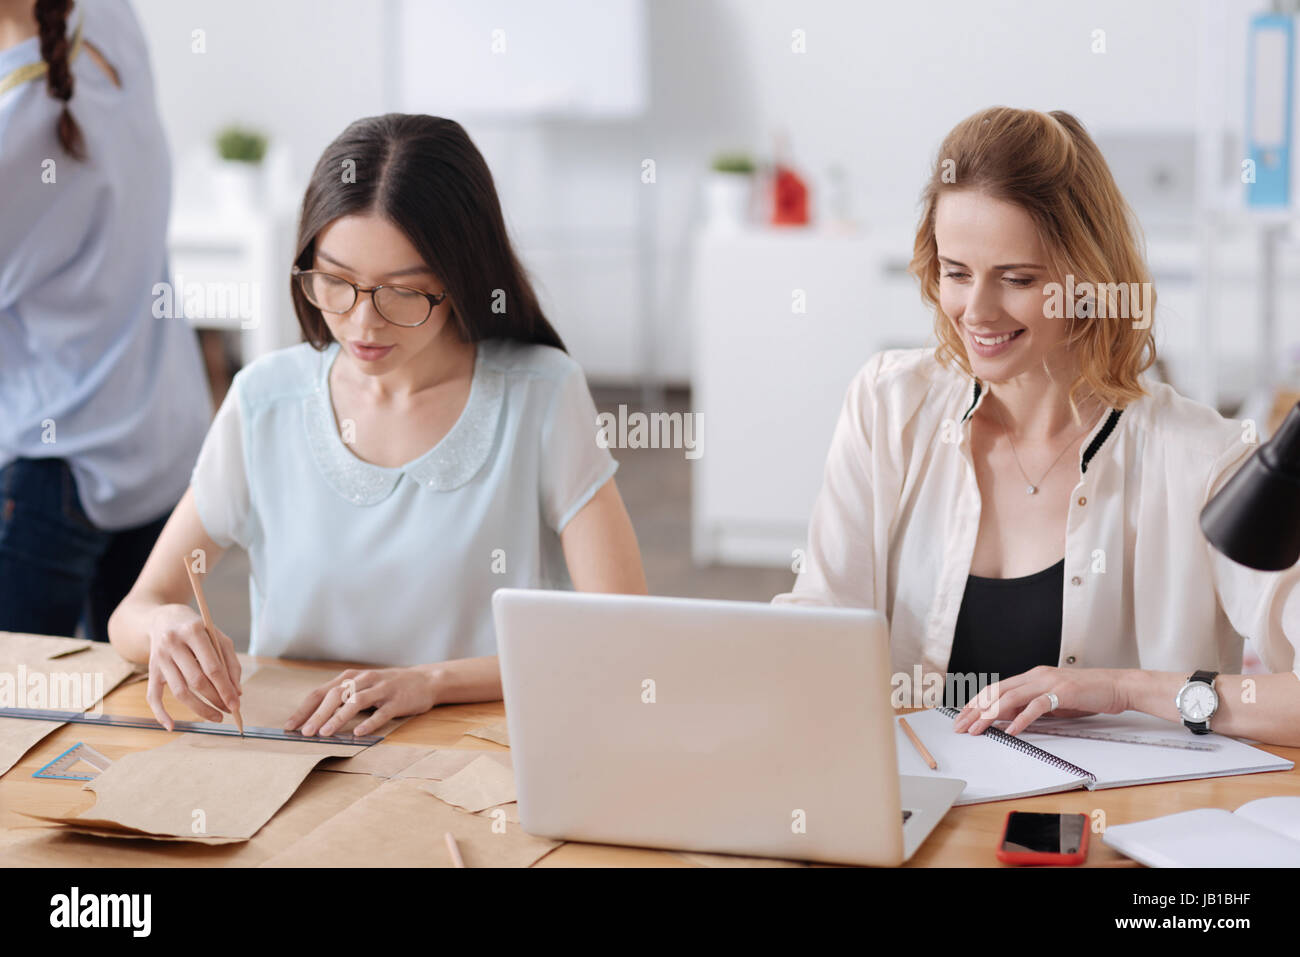 Pretty young women being immersed in work Stock Photo